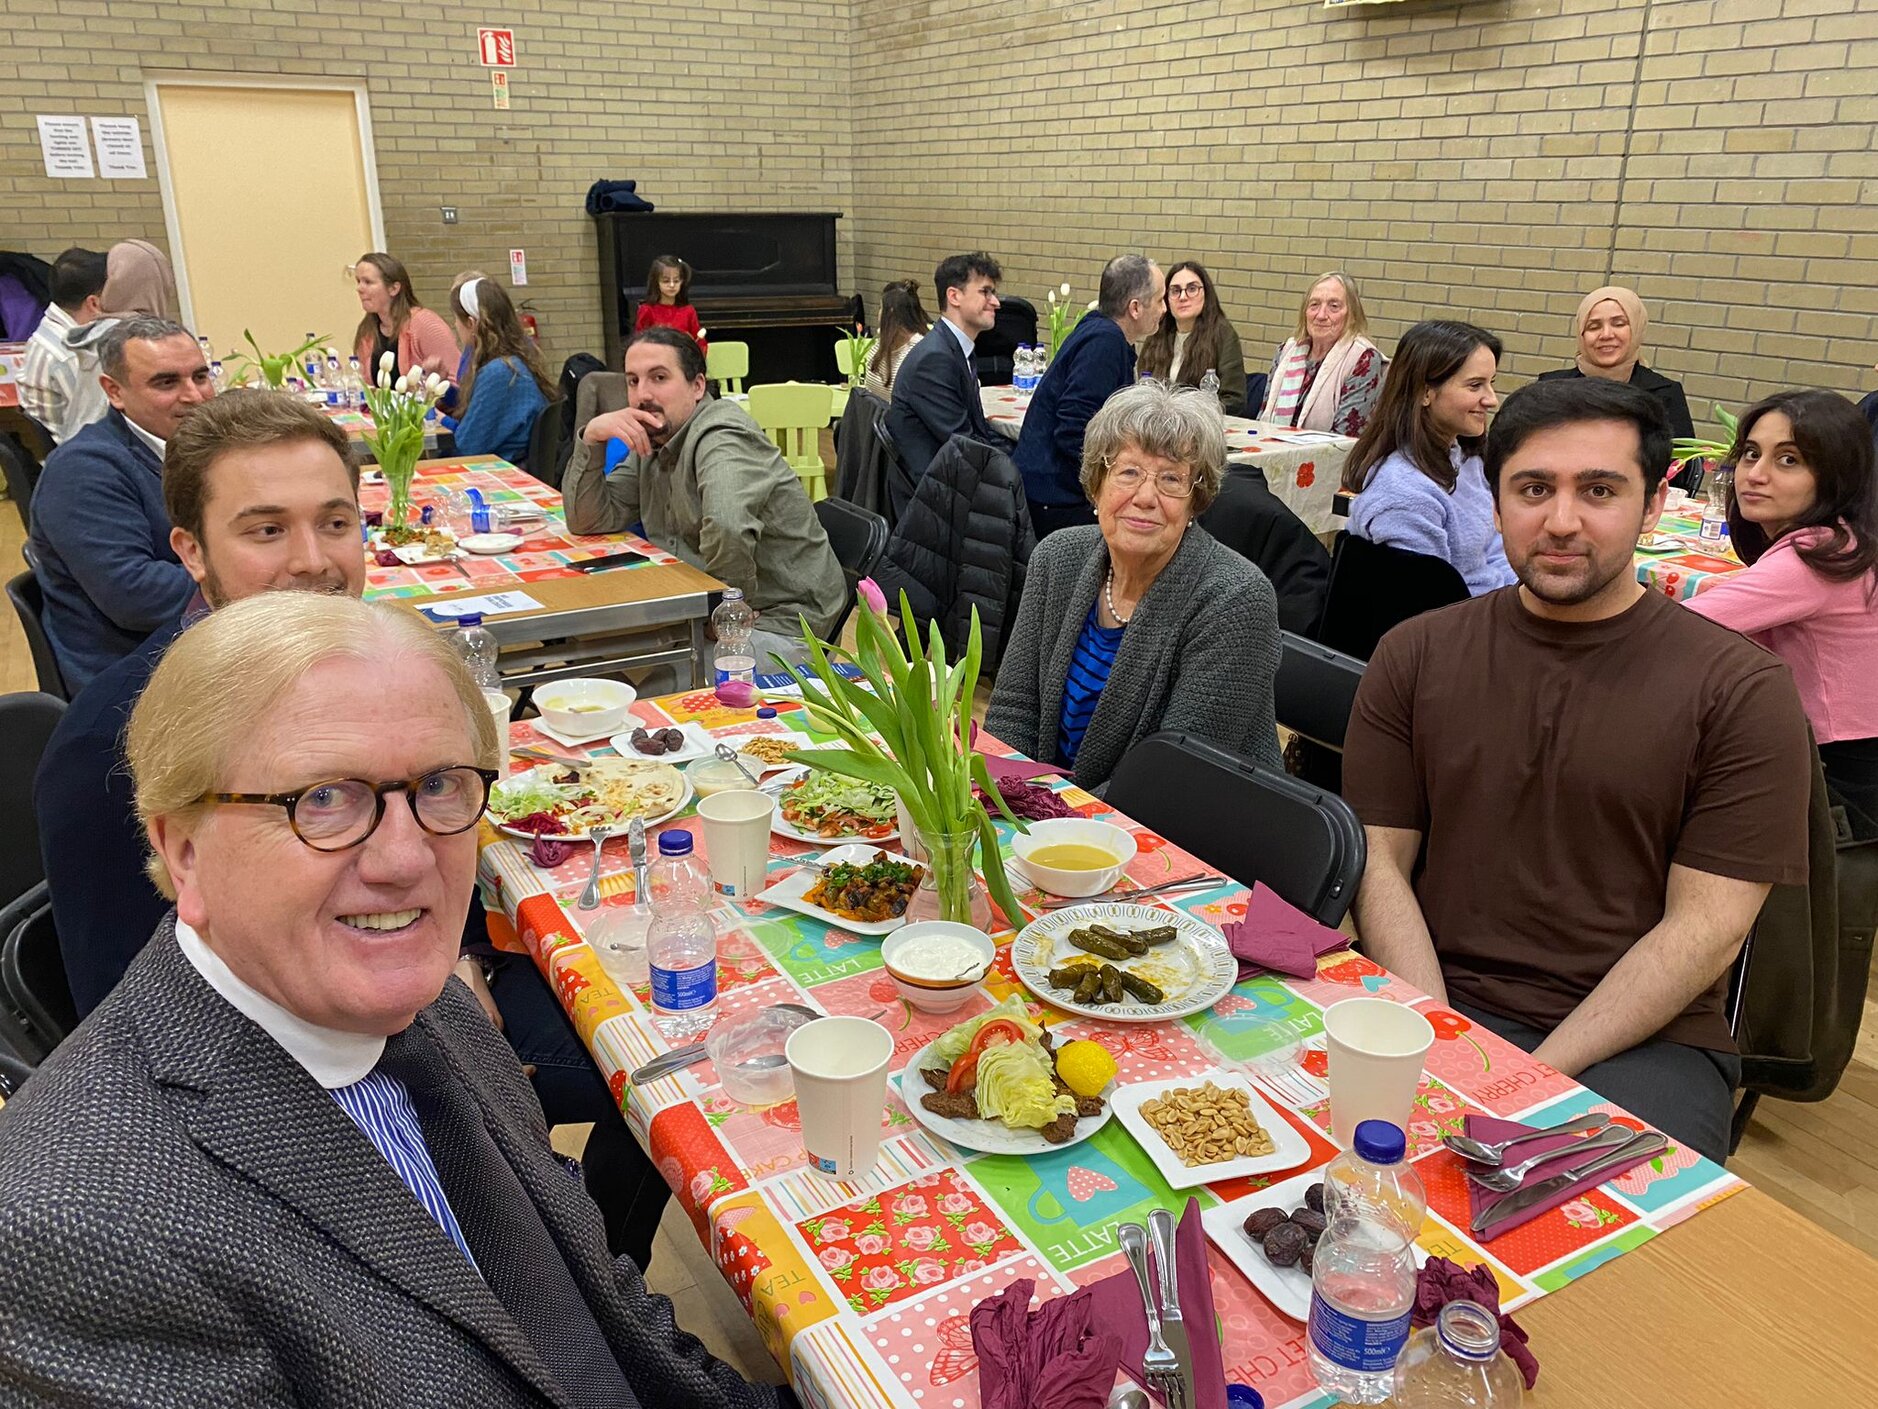 St Ann’s, Dawson Street Hosts Iftar Meal With Eire Dialogue